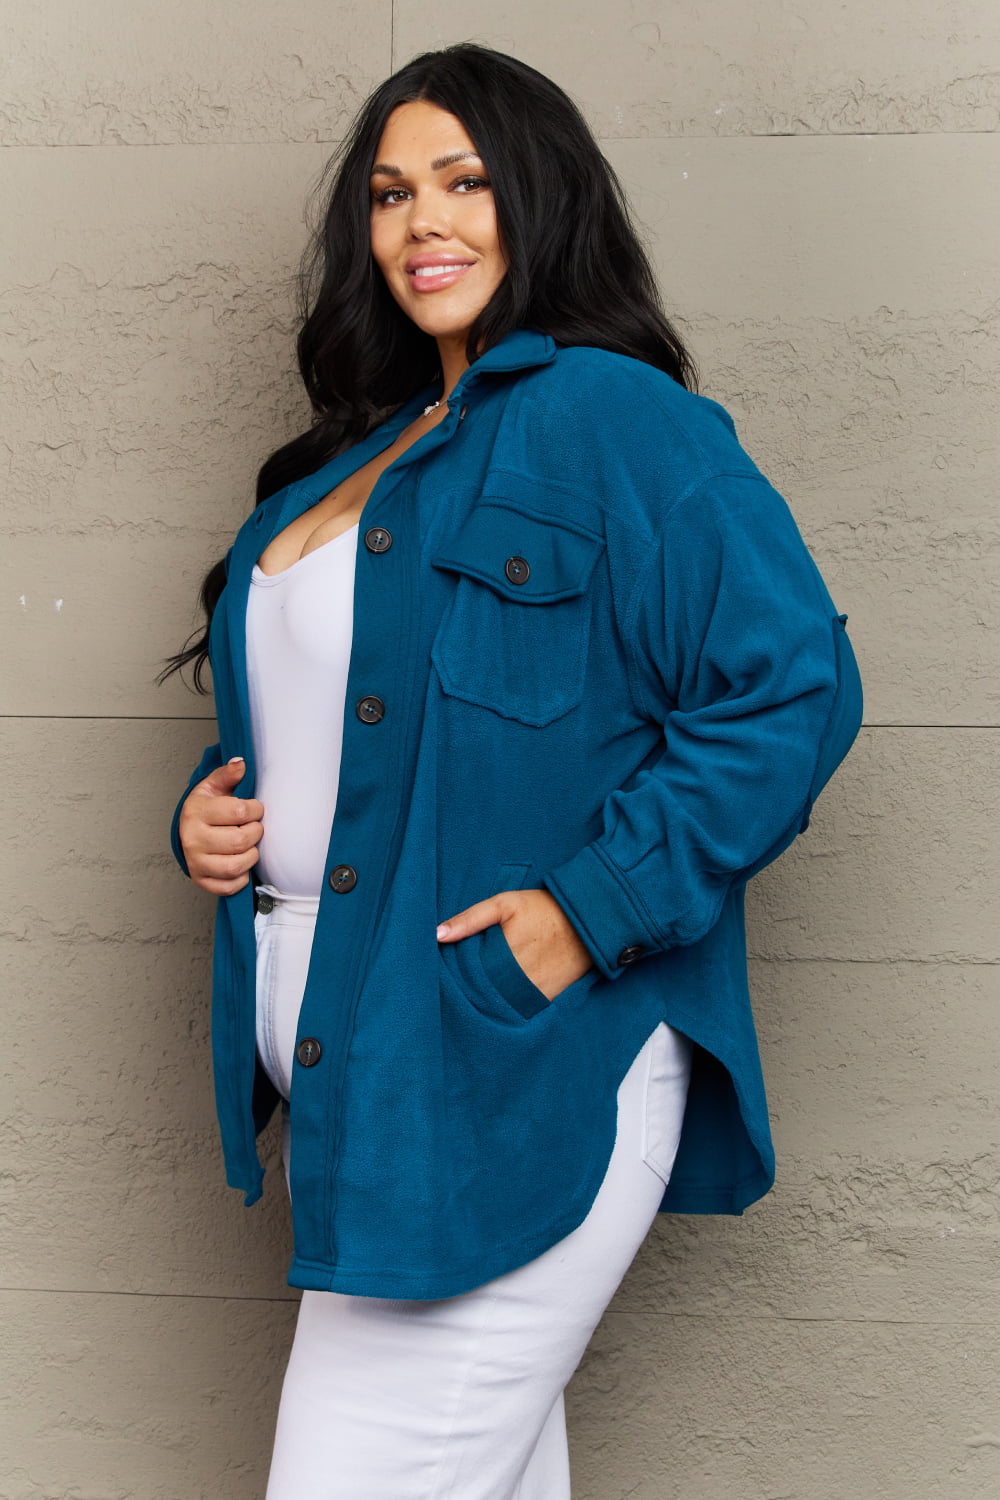 Rosy Brown Zenana Cozy in the Cabin Full Size Fleece Elbow Patch Shacket in Teal Clothing